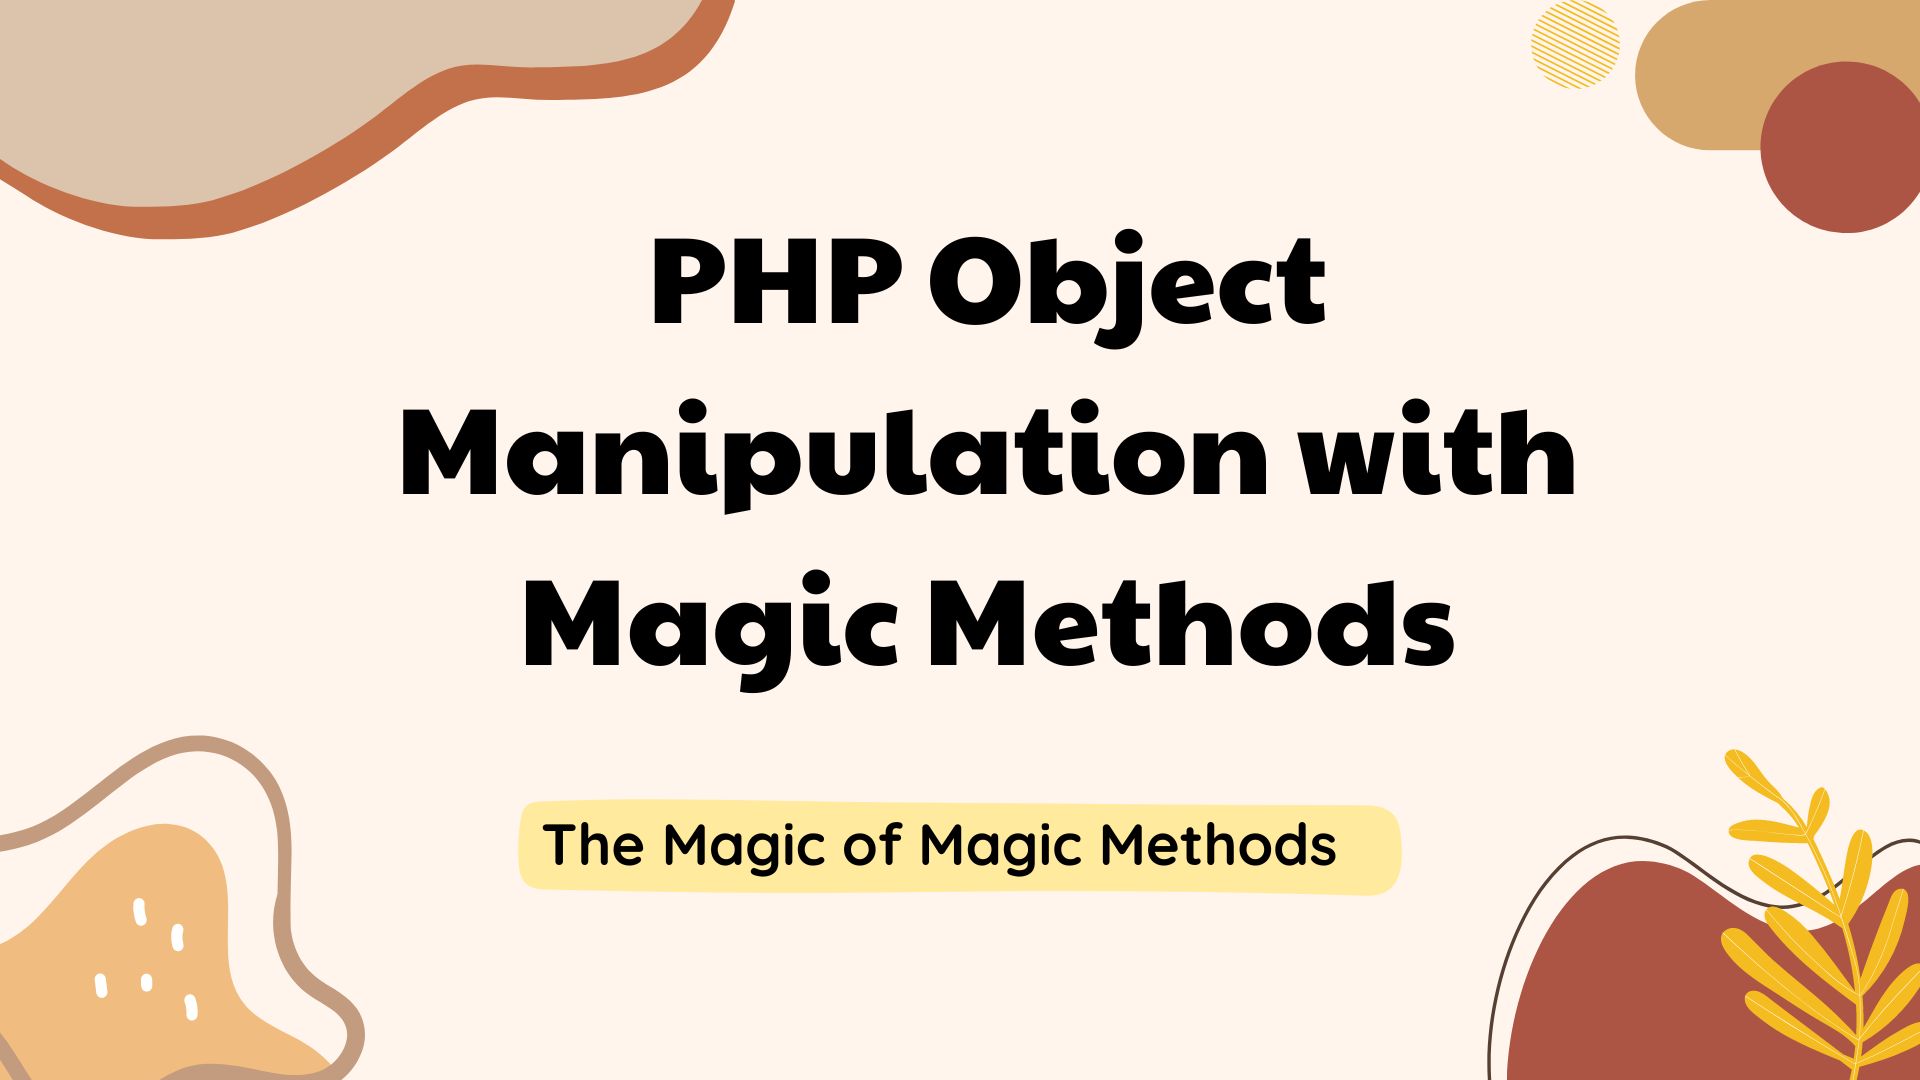 PHP Object Manipulation with Magic Methods